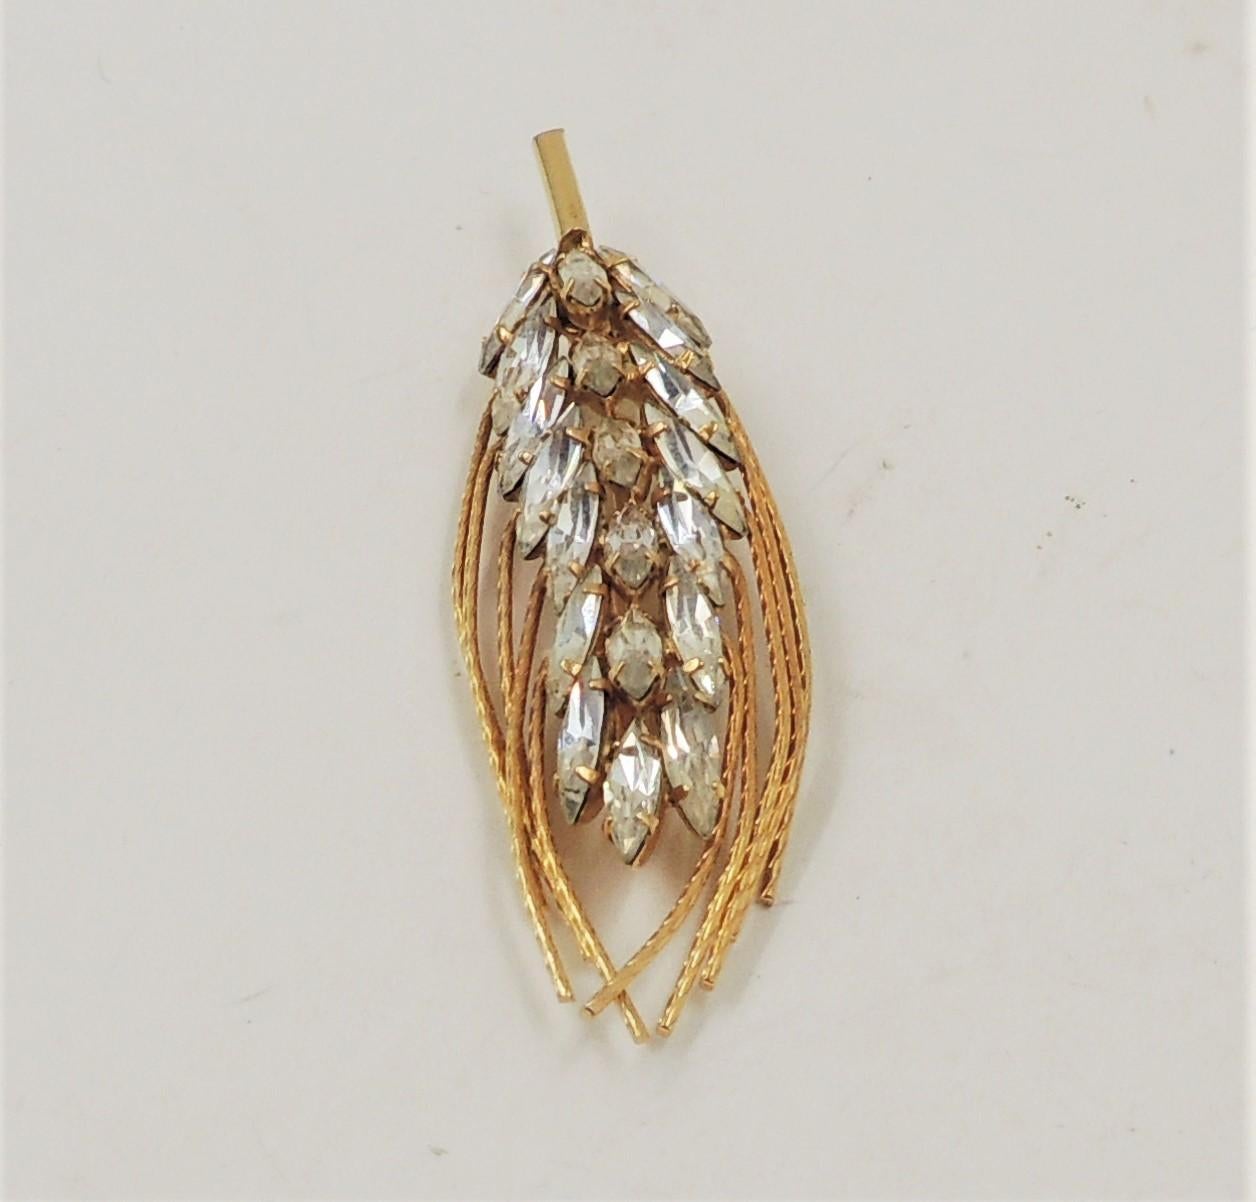 Goldtone marquise clear rhinestone wheat sheaf brooch with security clasp. Measures: 3 inches wide by 7/8 inches tall. Condition: Very good; minor wear, signature is very faint. 

Vintage Napier jewelry was made in Meridan, Connecticut and is very